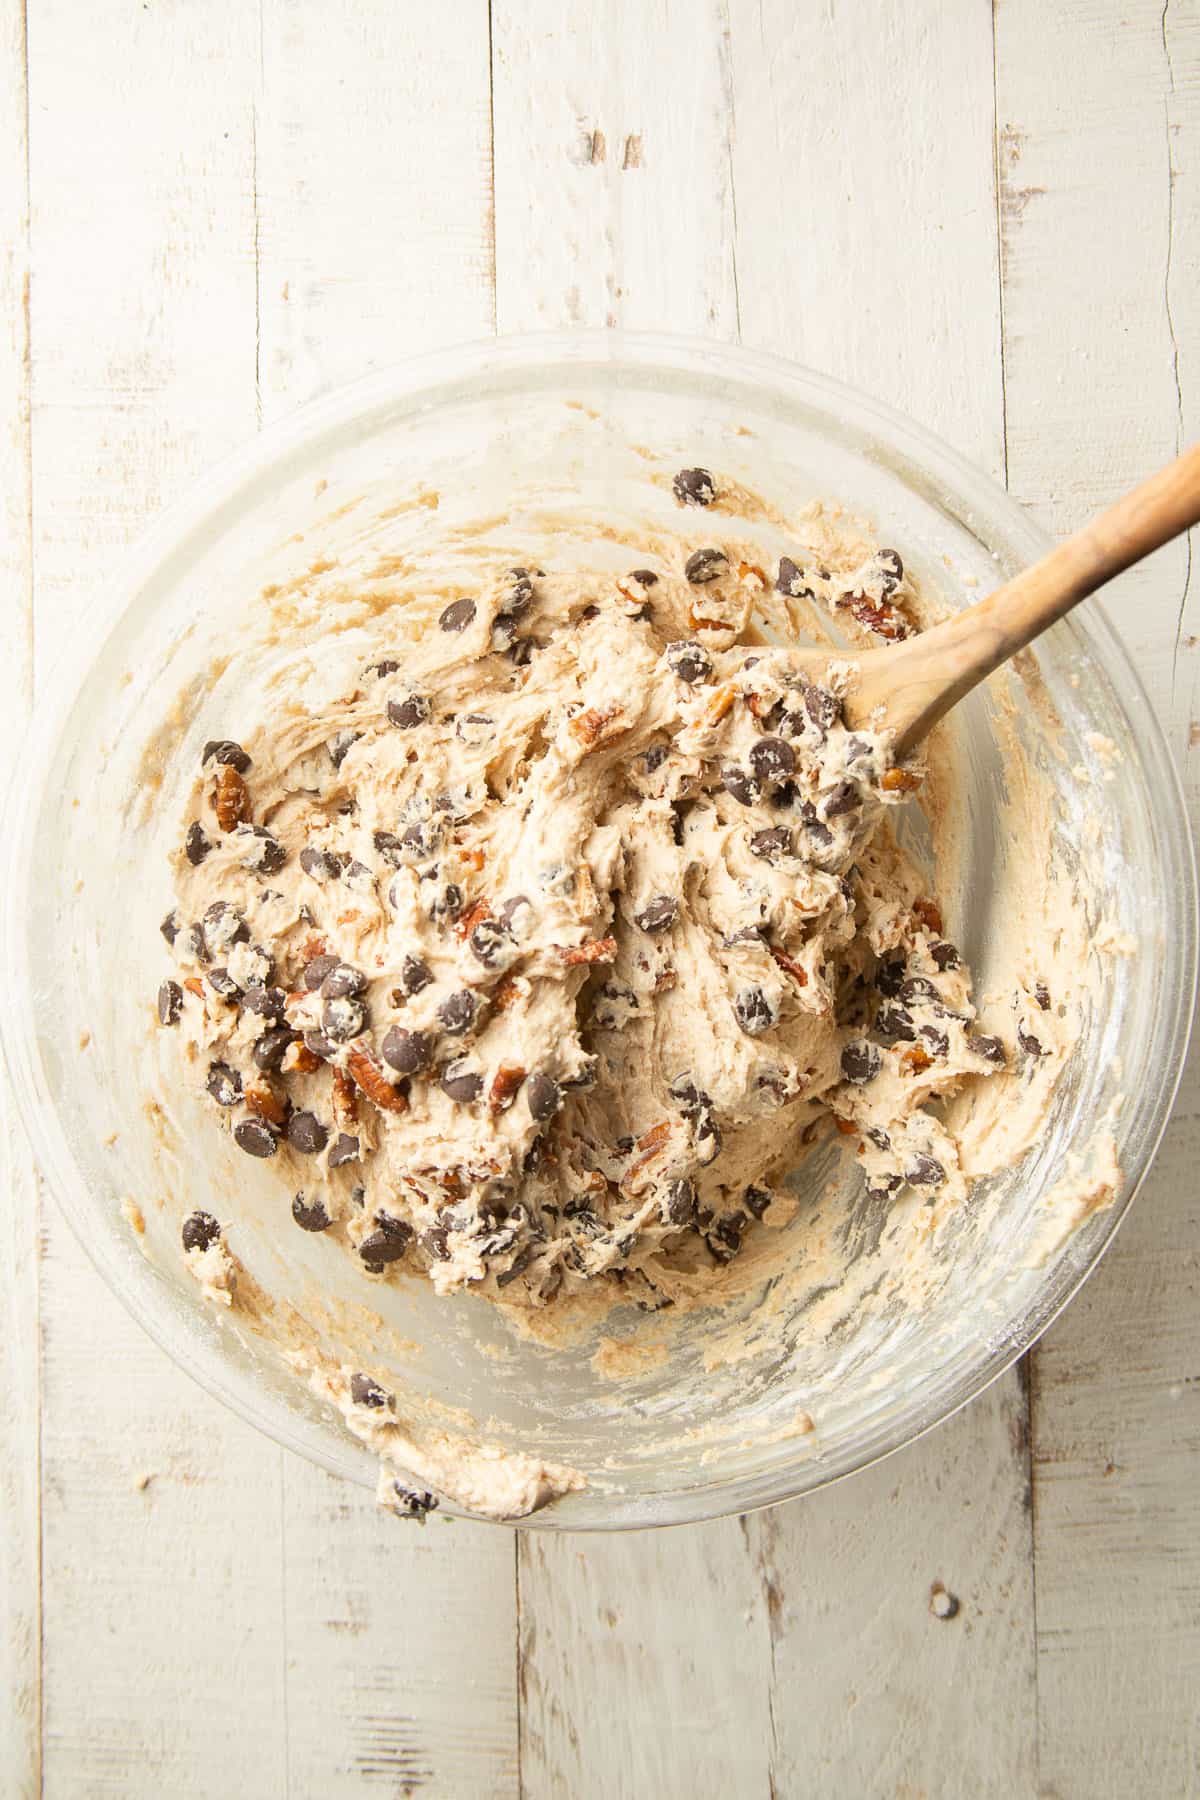 Cookie bar dough with chocolate chips and pecans in a mixing bowl with a wooden spoon.